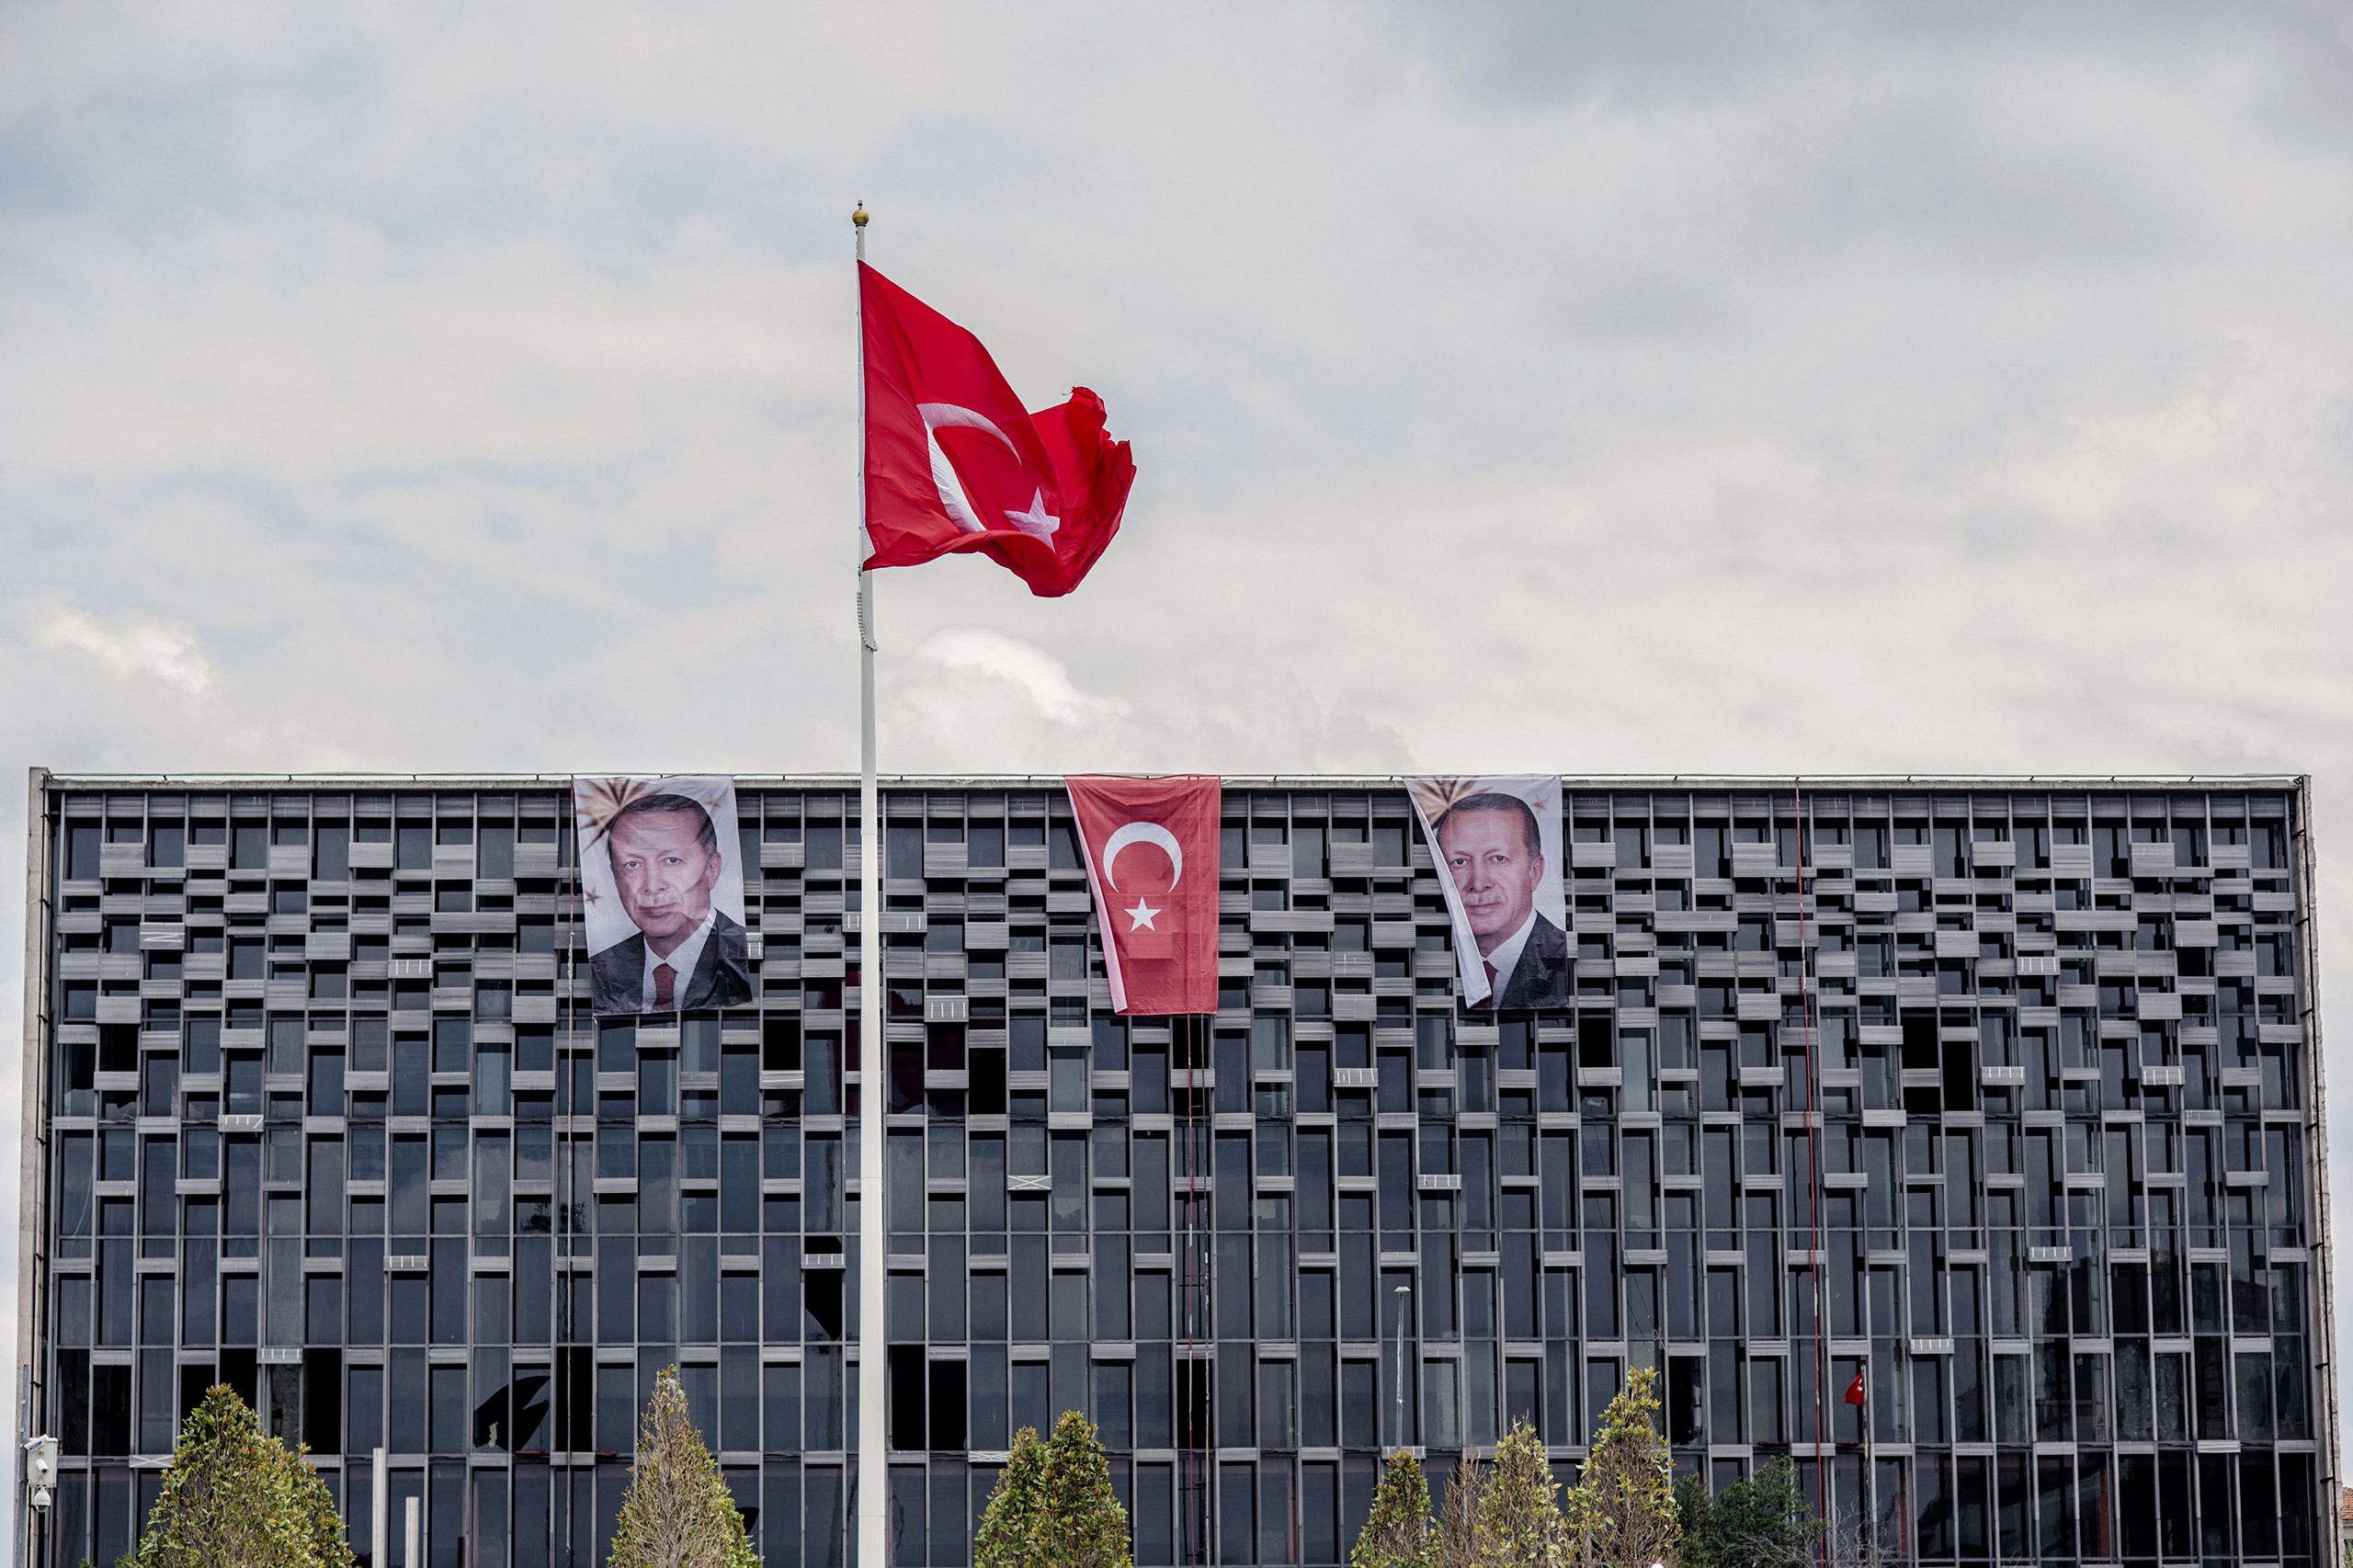 Banners with photographs of President Recep Tayyip Erdogan hang from the roof of a commercial building alongside the national flag in Istanbul, Turkey, on July 18, 2016. (Ismail Ferdous—Bloomberg/Getty Images)